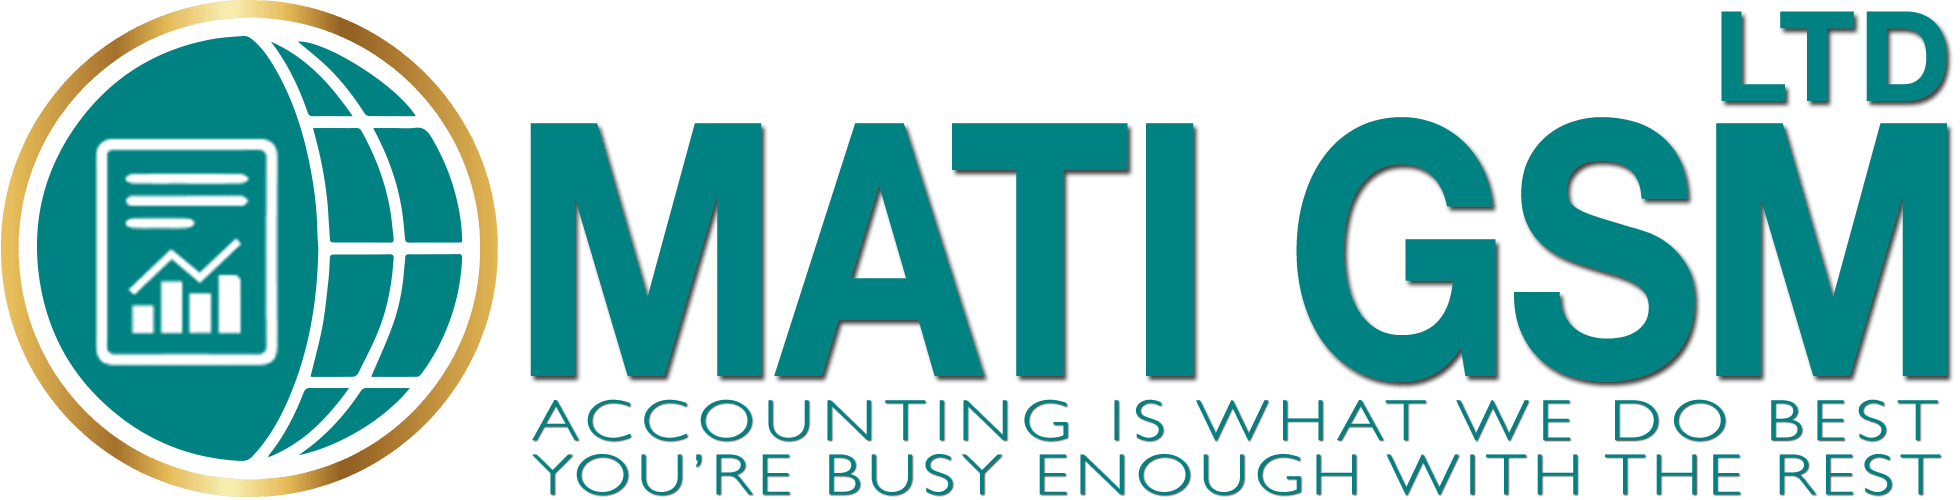 Mati GSM LTD boosts productivity by migrating from laptops in the office to Computify's Cloud Desktop